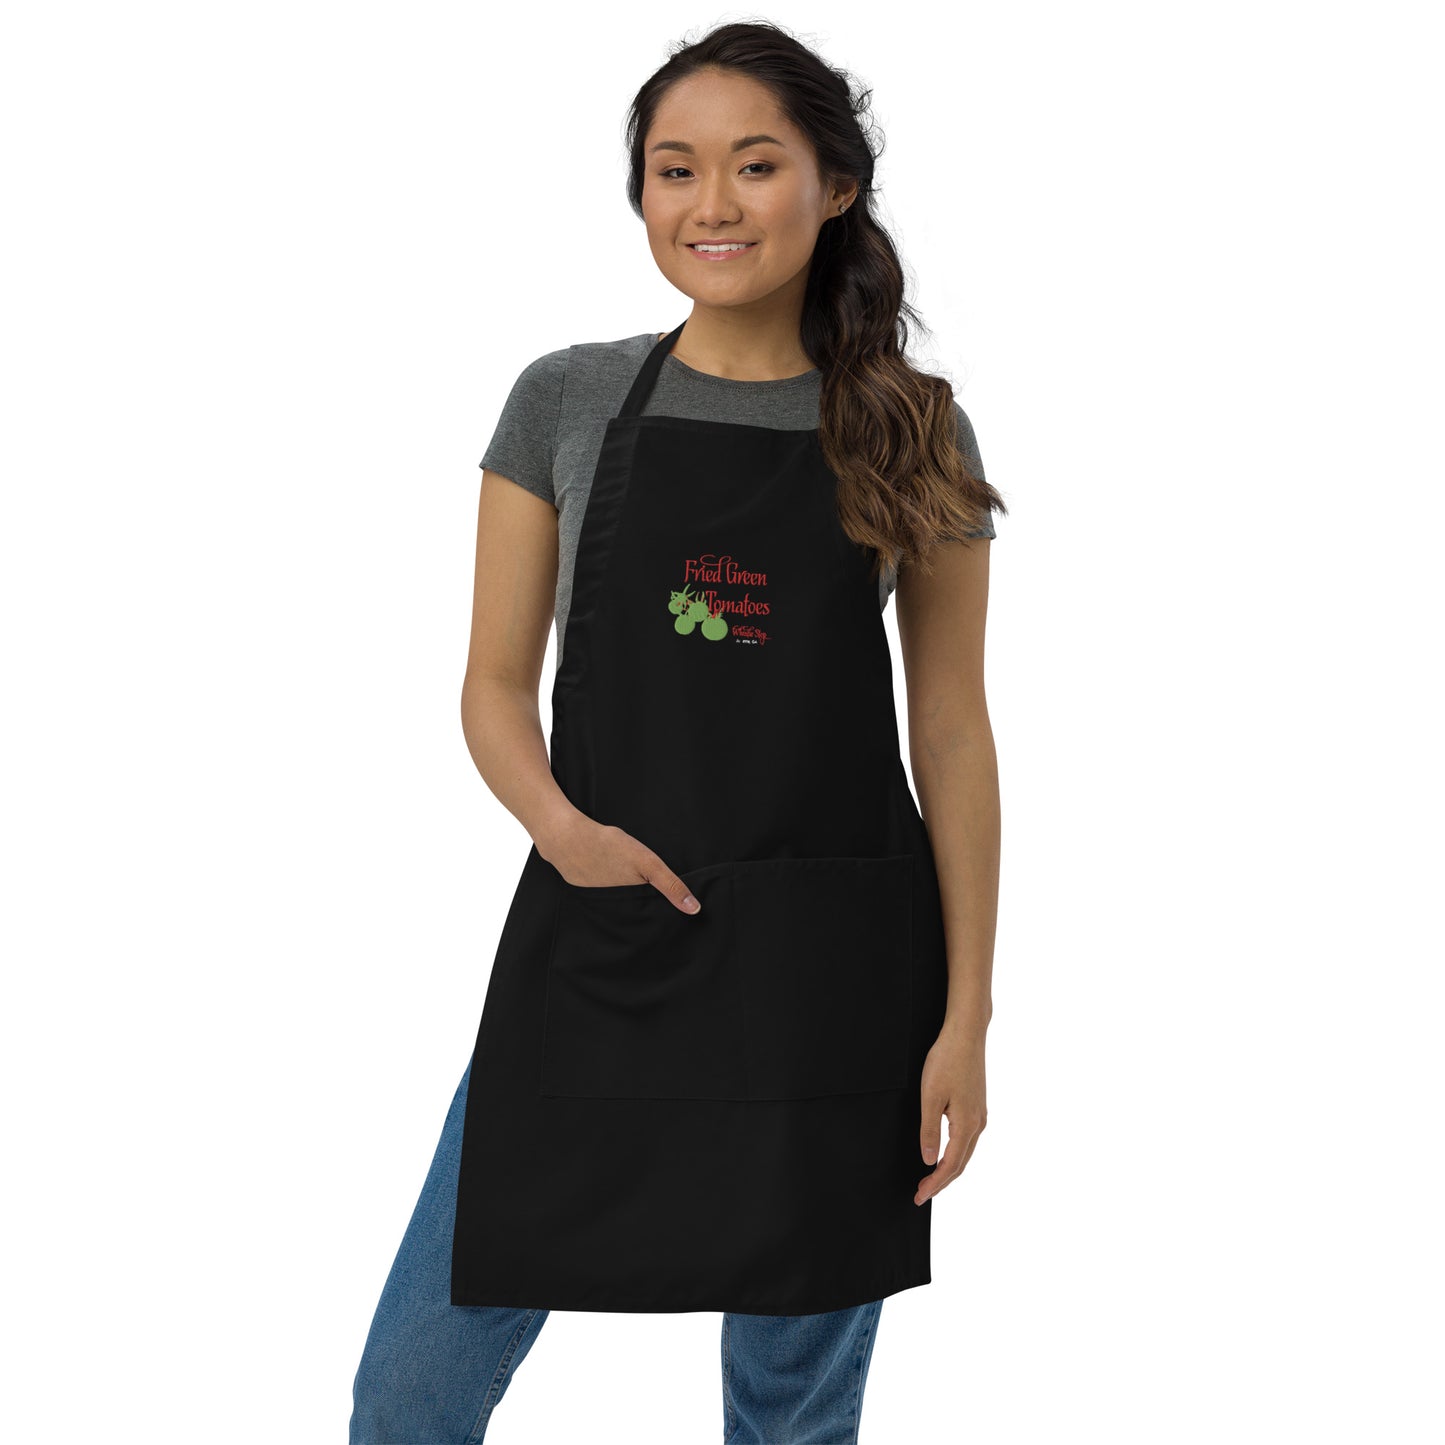 Fried Green Tomatoes Embroidered Apron